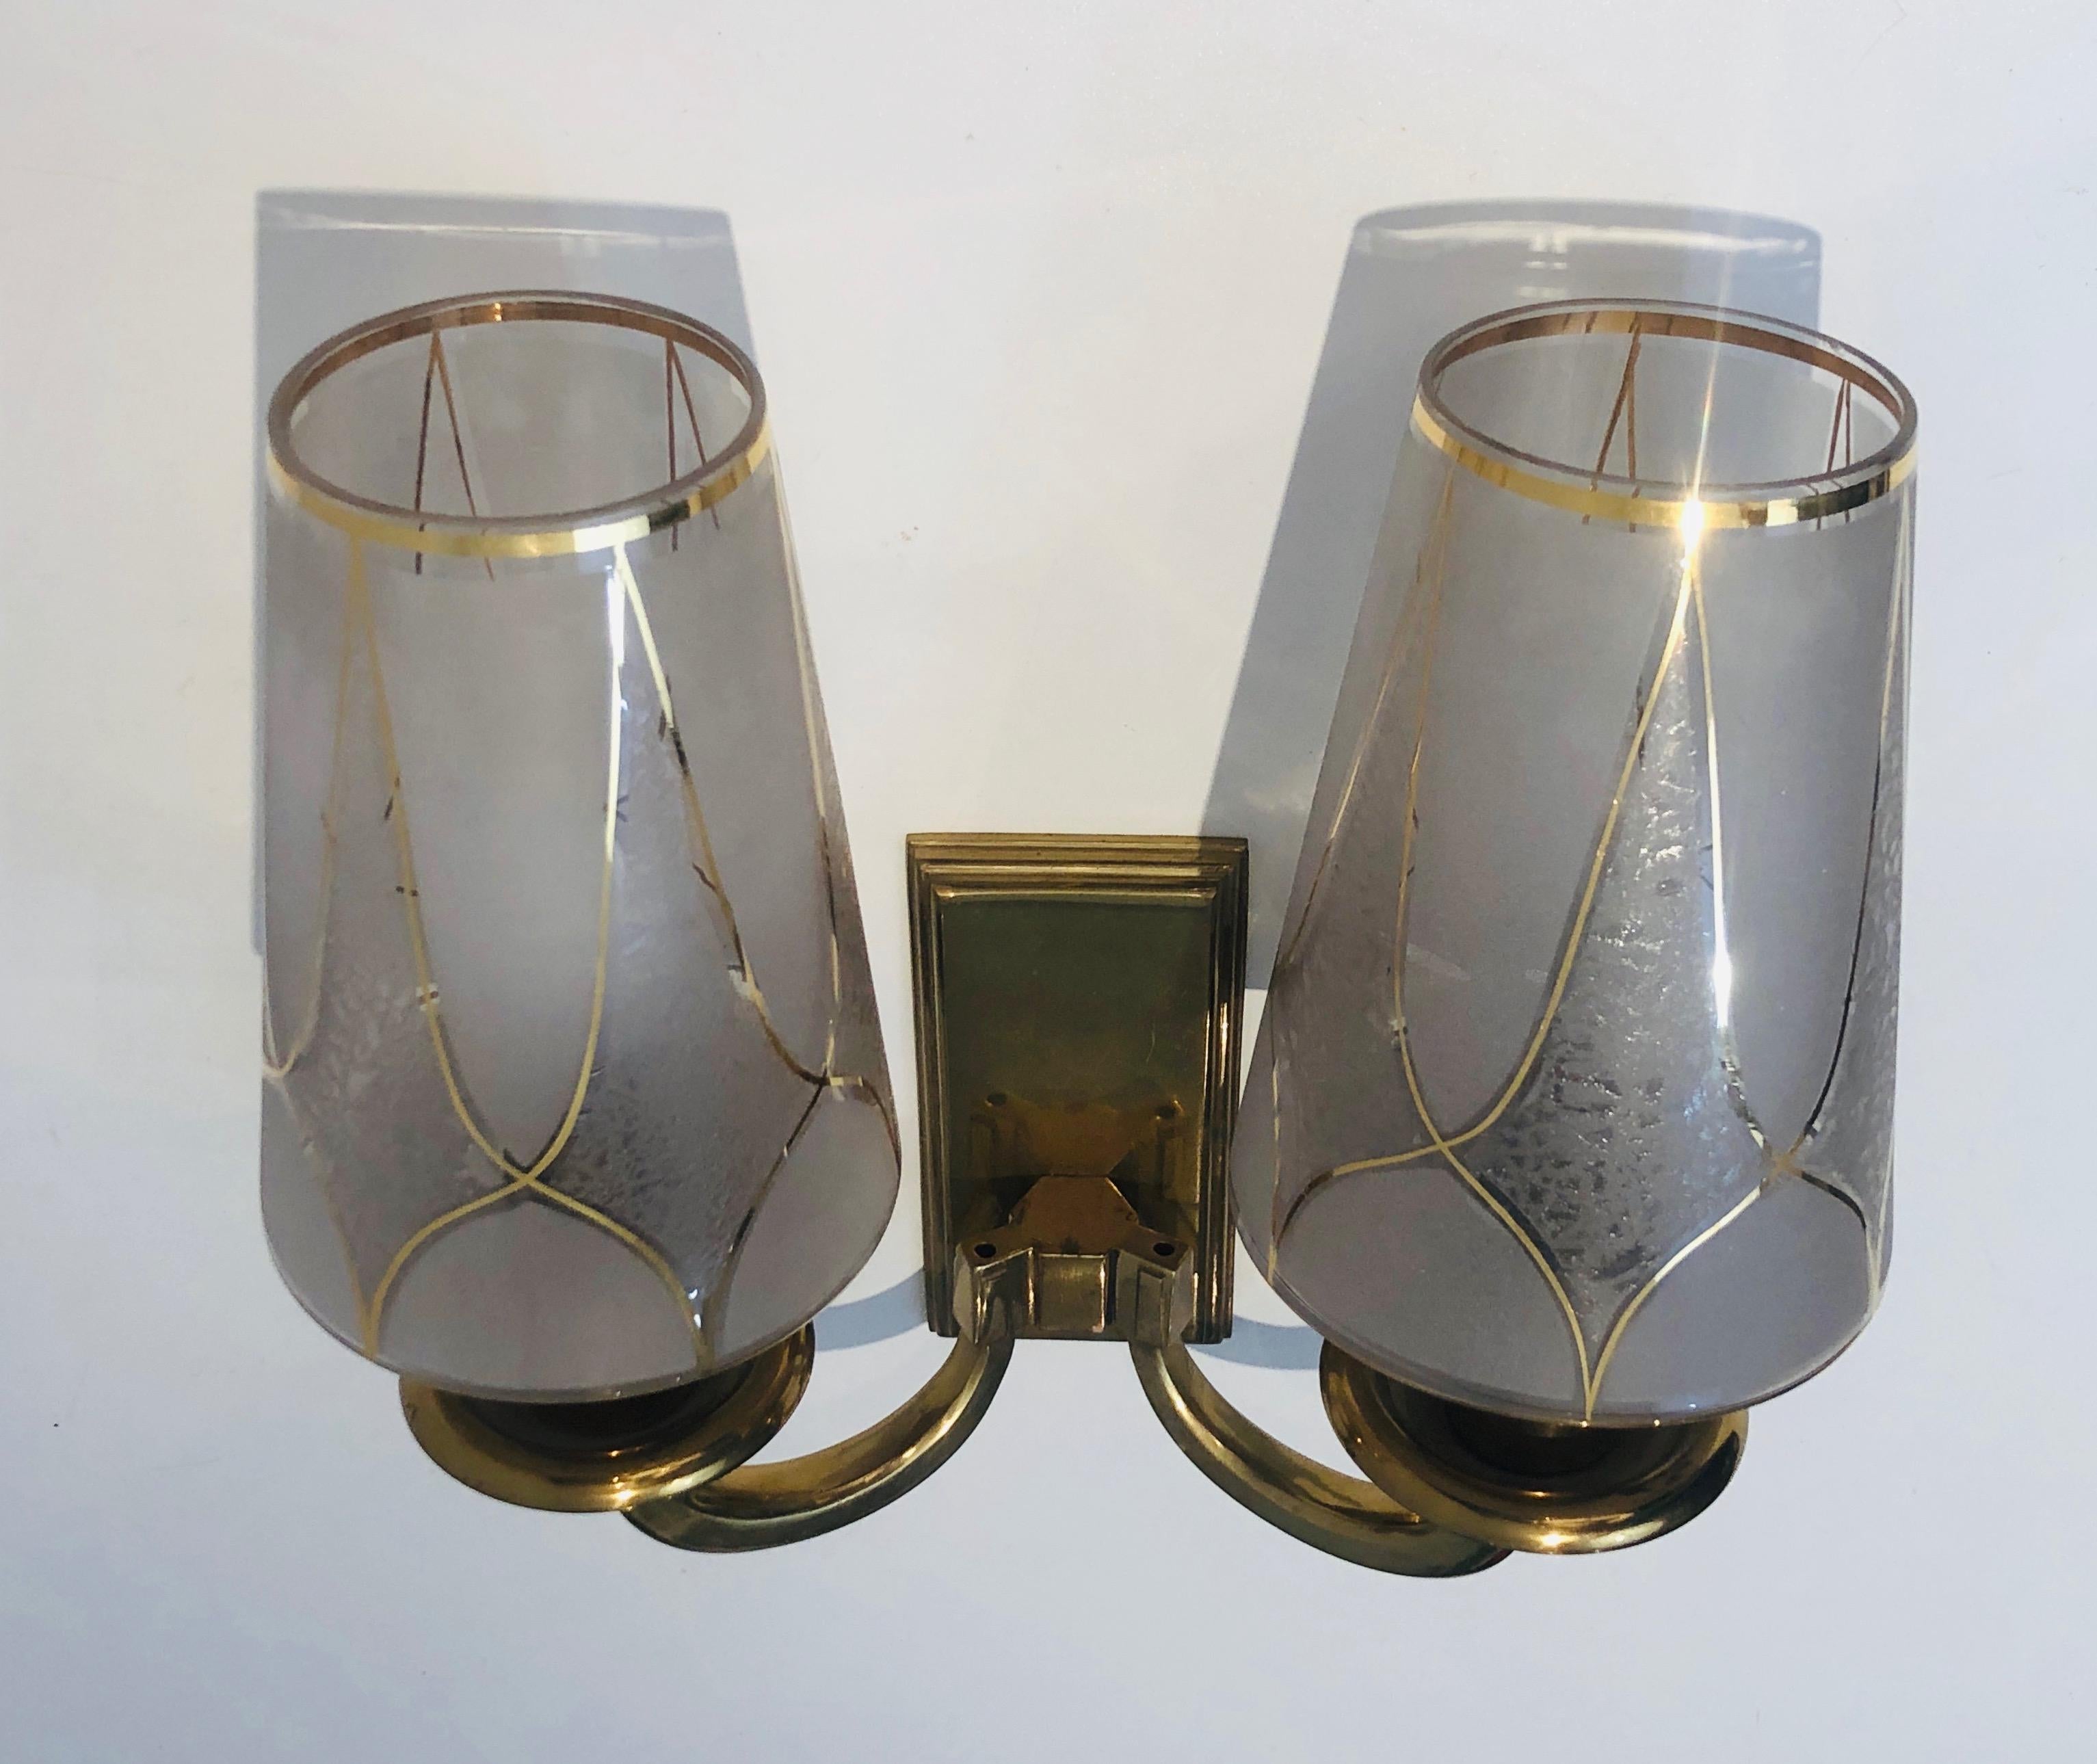 Pair of Art Deco Brass Wall Lights, French Work in the Style of Perzel, 1900's For Sale 5